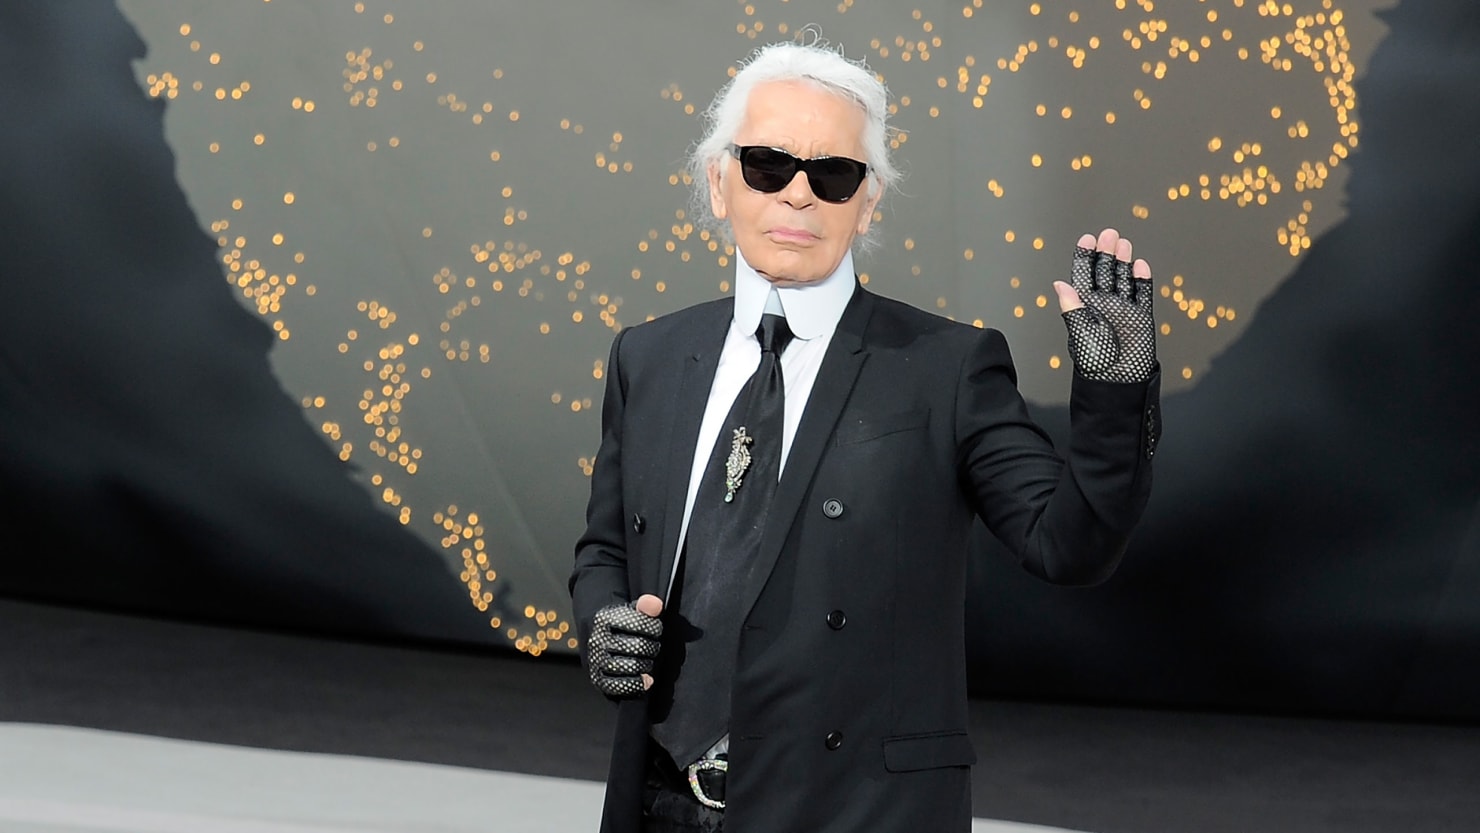 Anna Wintour on Karl Lagerfeld, and the Clothes He Made for Her